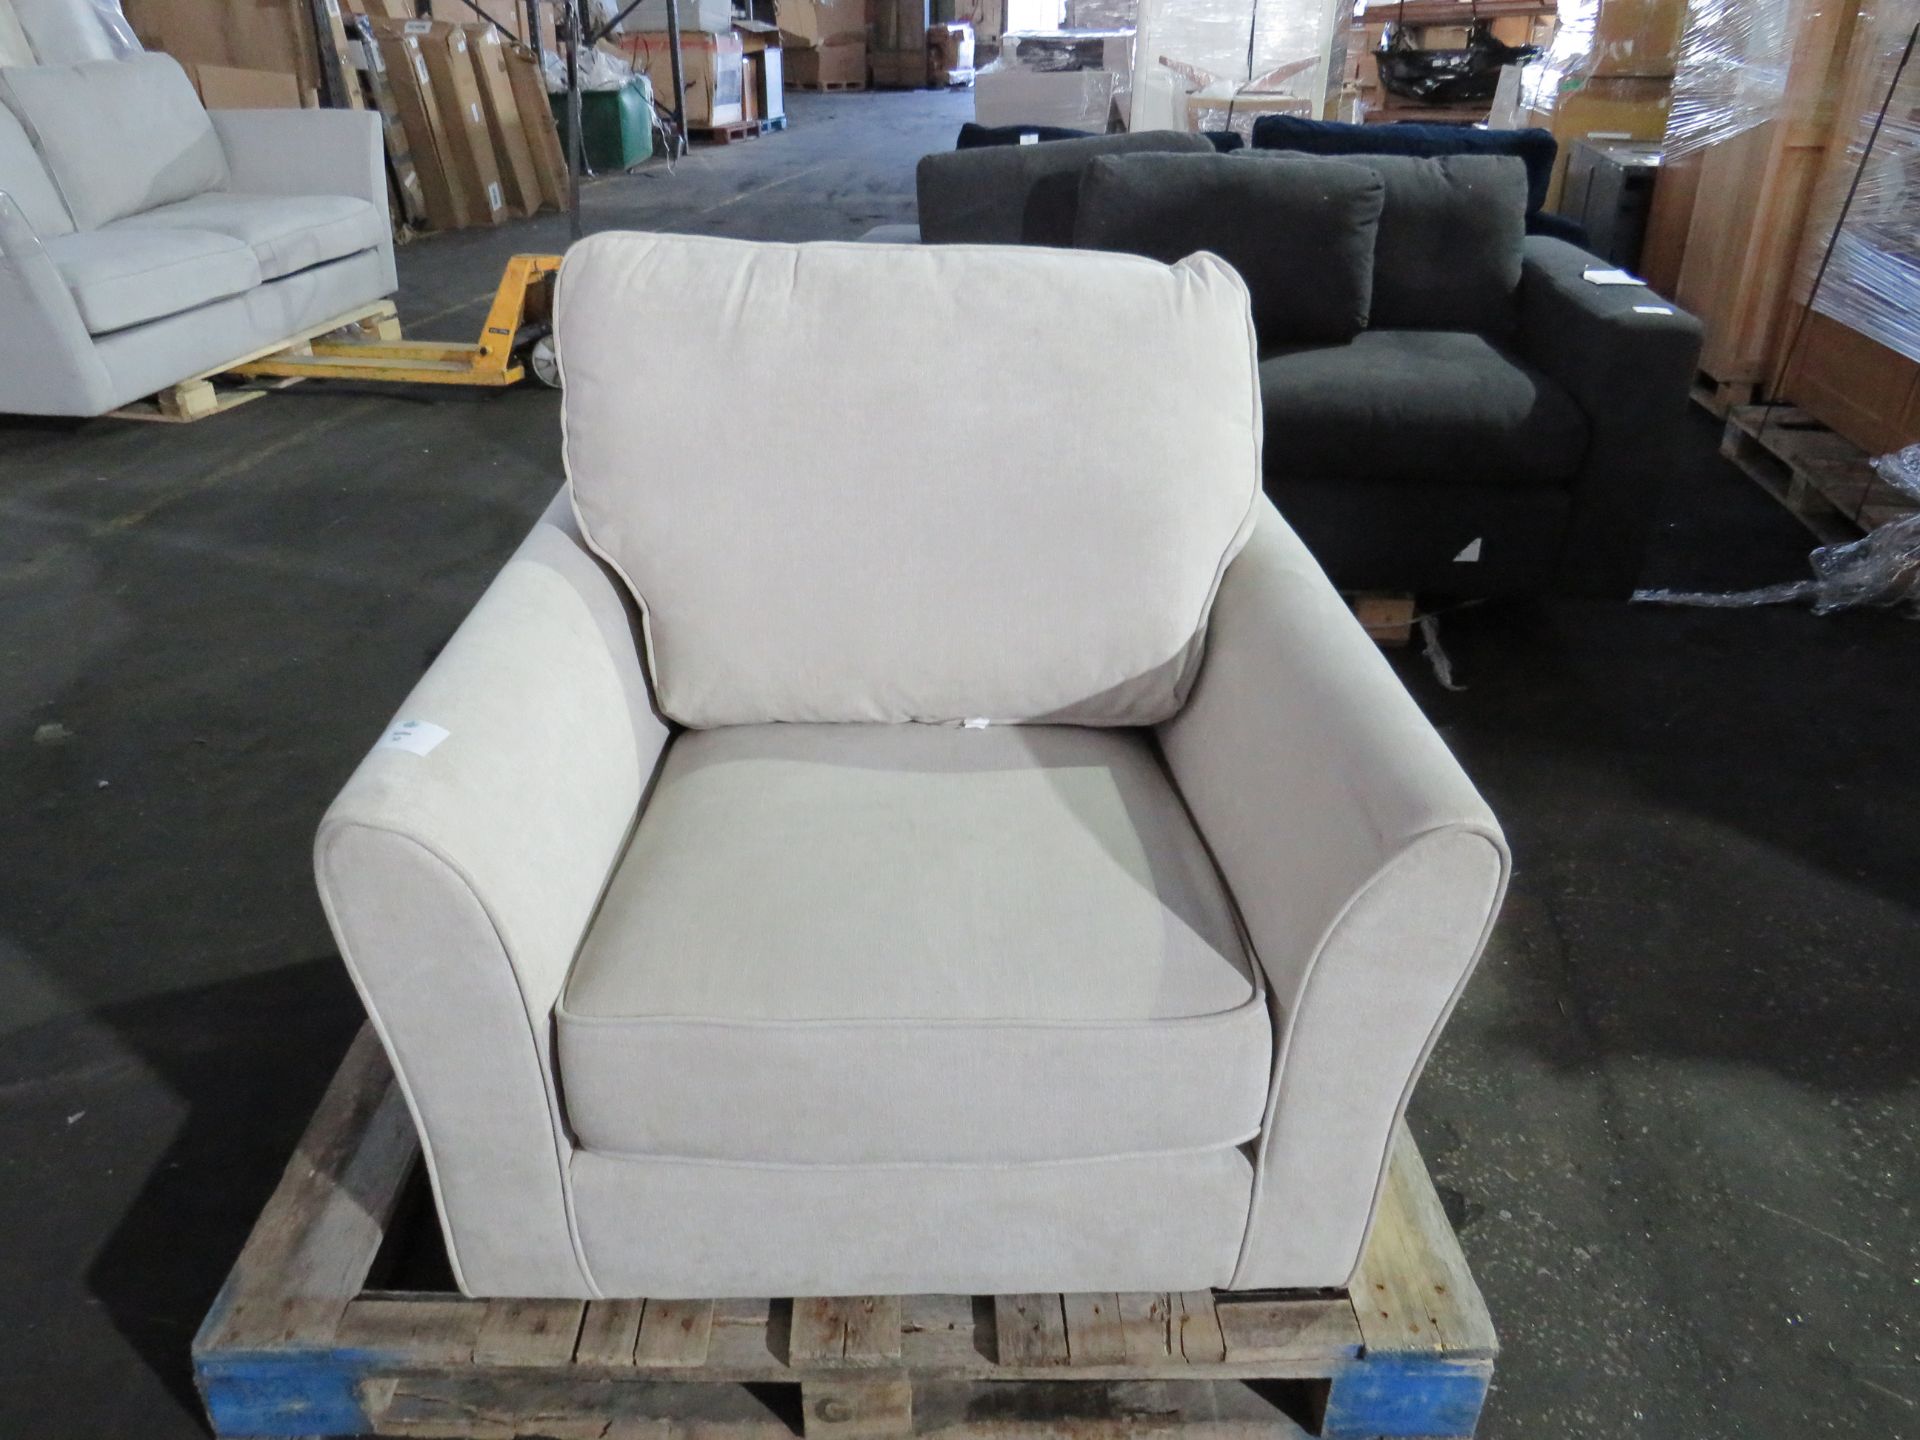 Oak Furnitureland Jasmine Armchair in Campo Fabric - Silver with Khalifa Steel Scatters RRP “?599.99